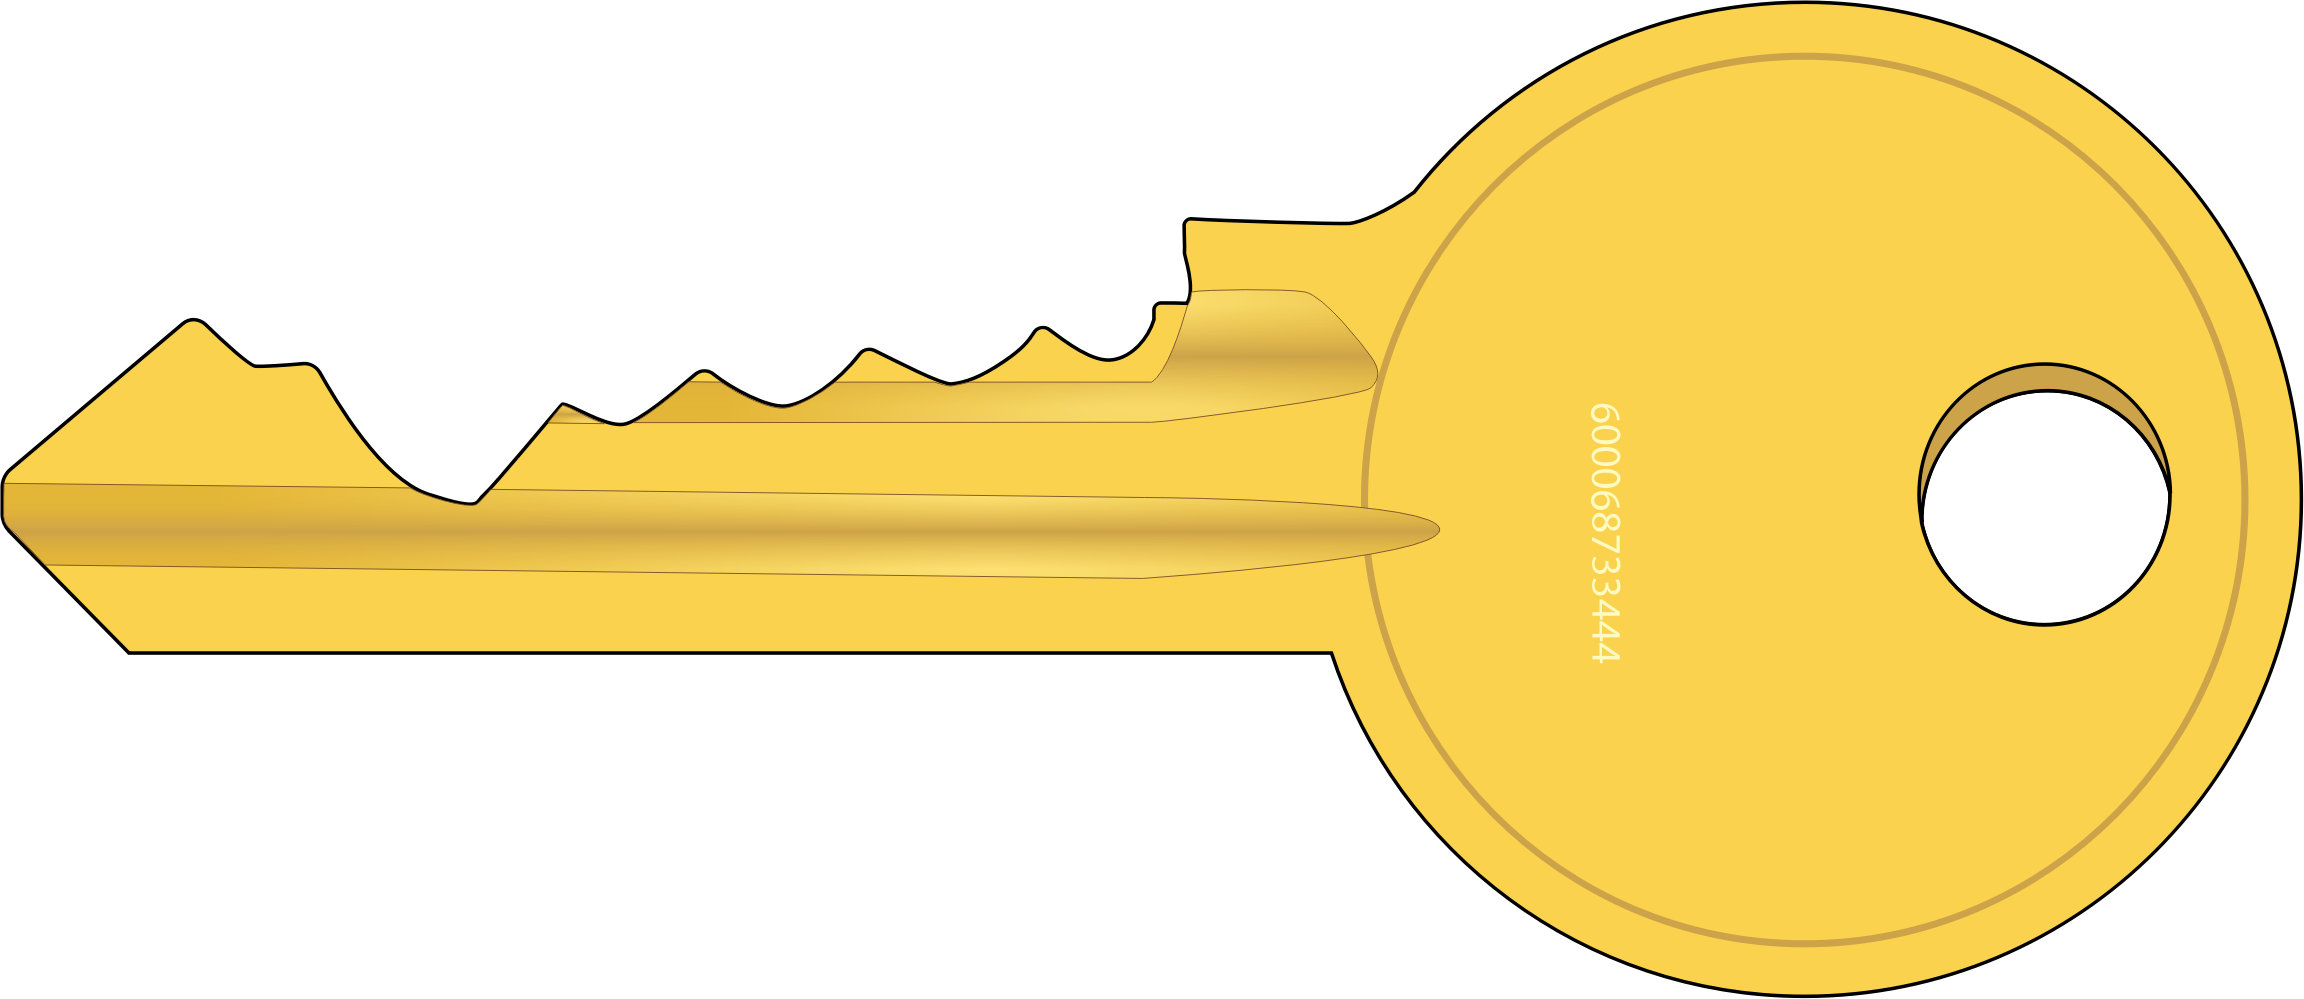 Lock And Key Clipart Clipart Kid - Clipart Of A Key (2304x999)